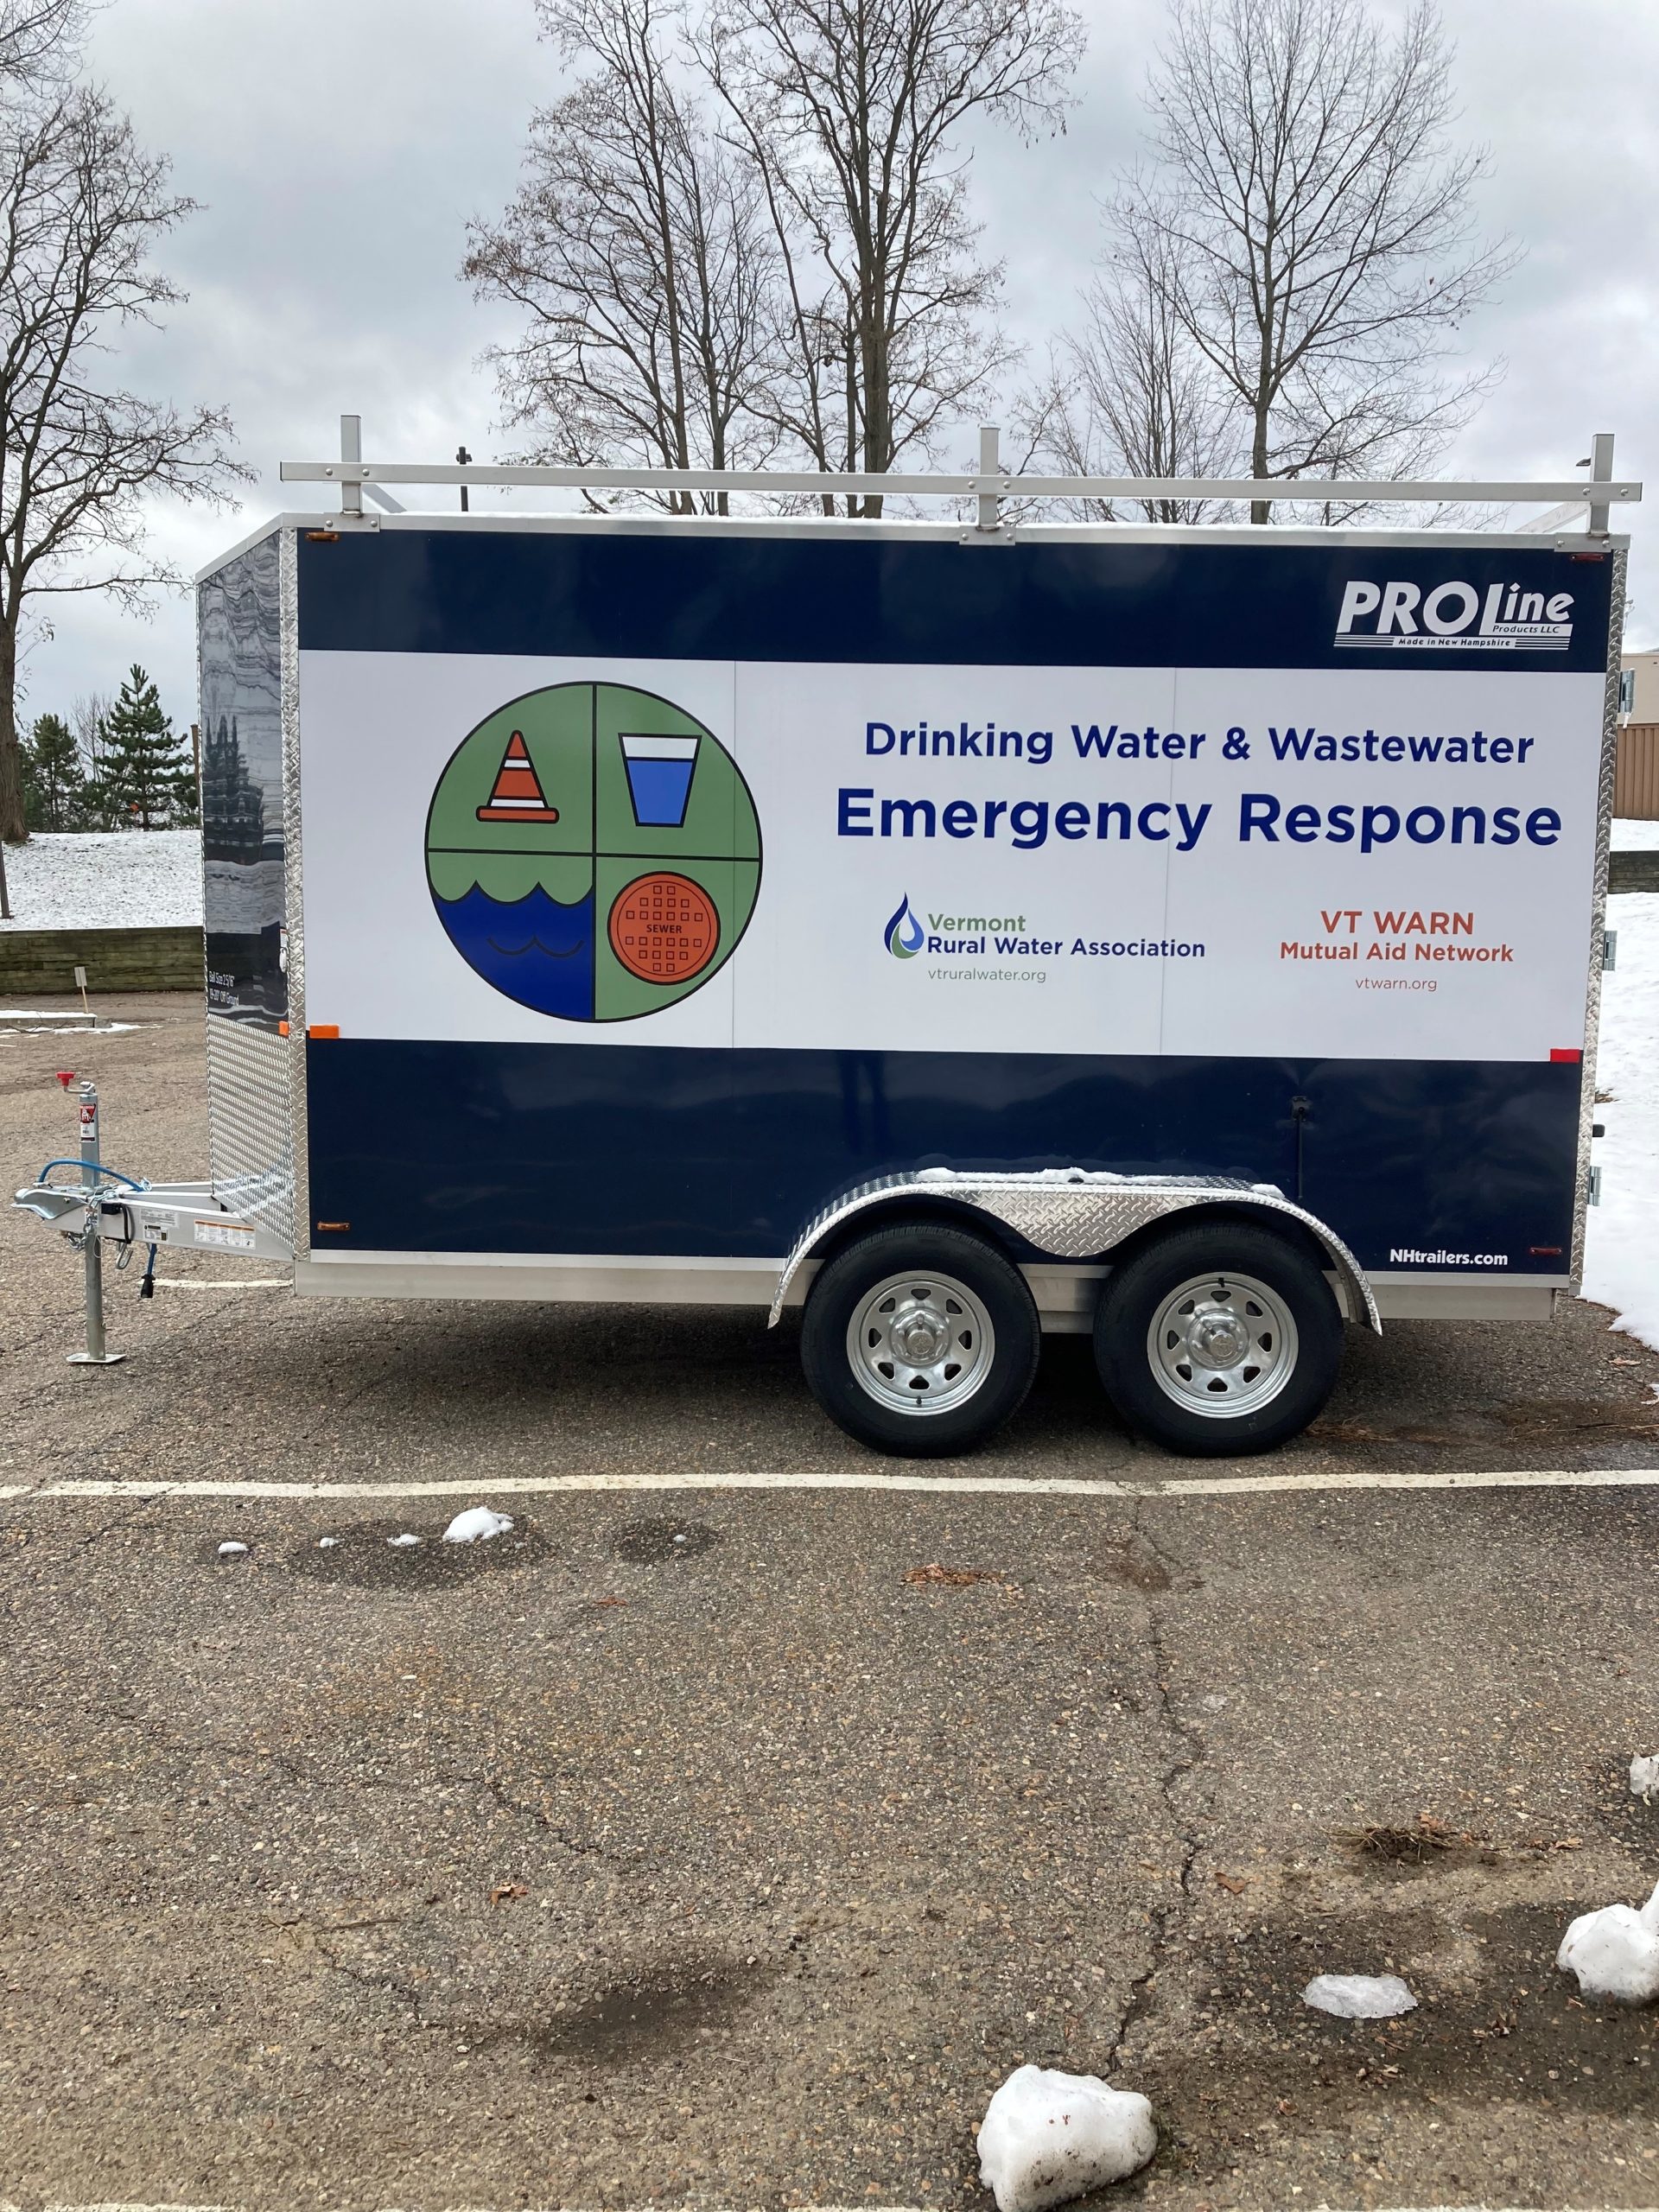 A navy blue trailer that says "Drinking Water & Wastewater Emergency Response"